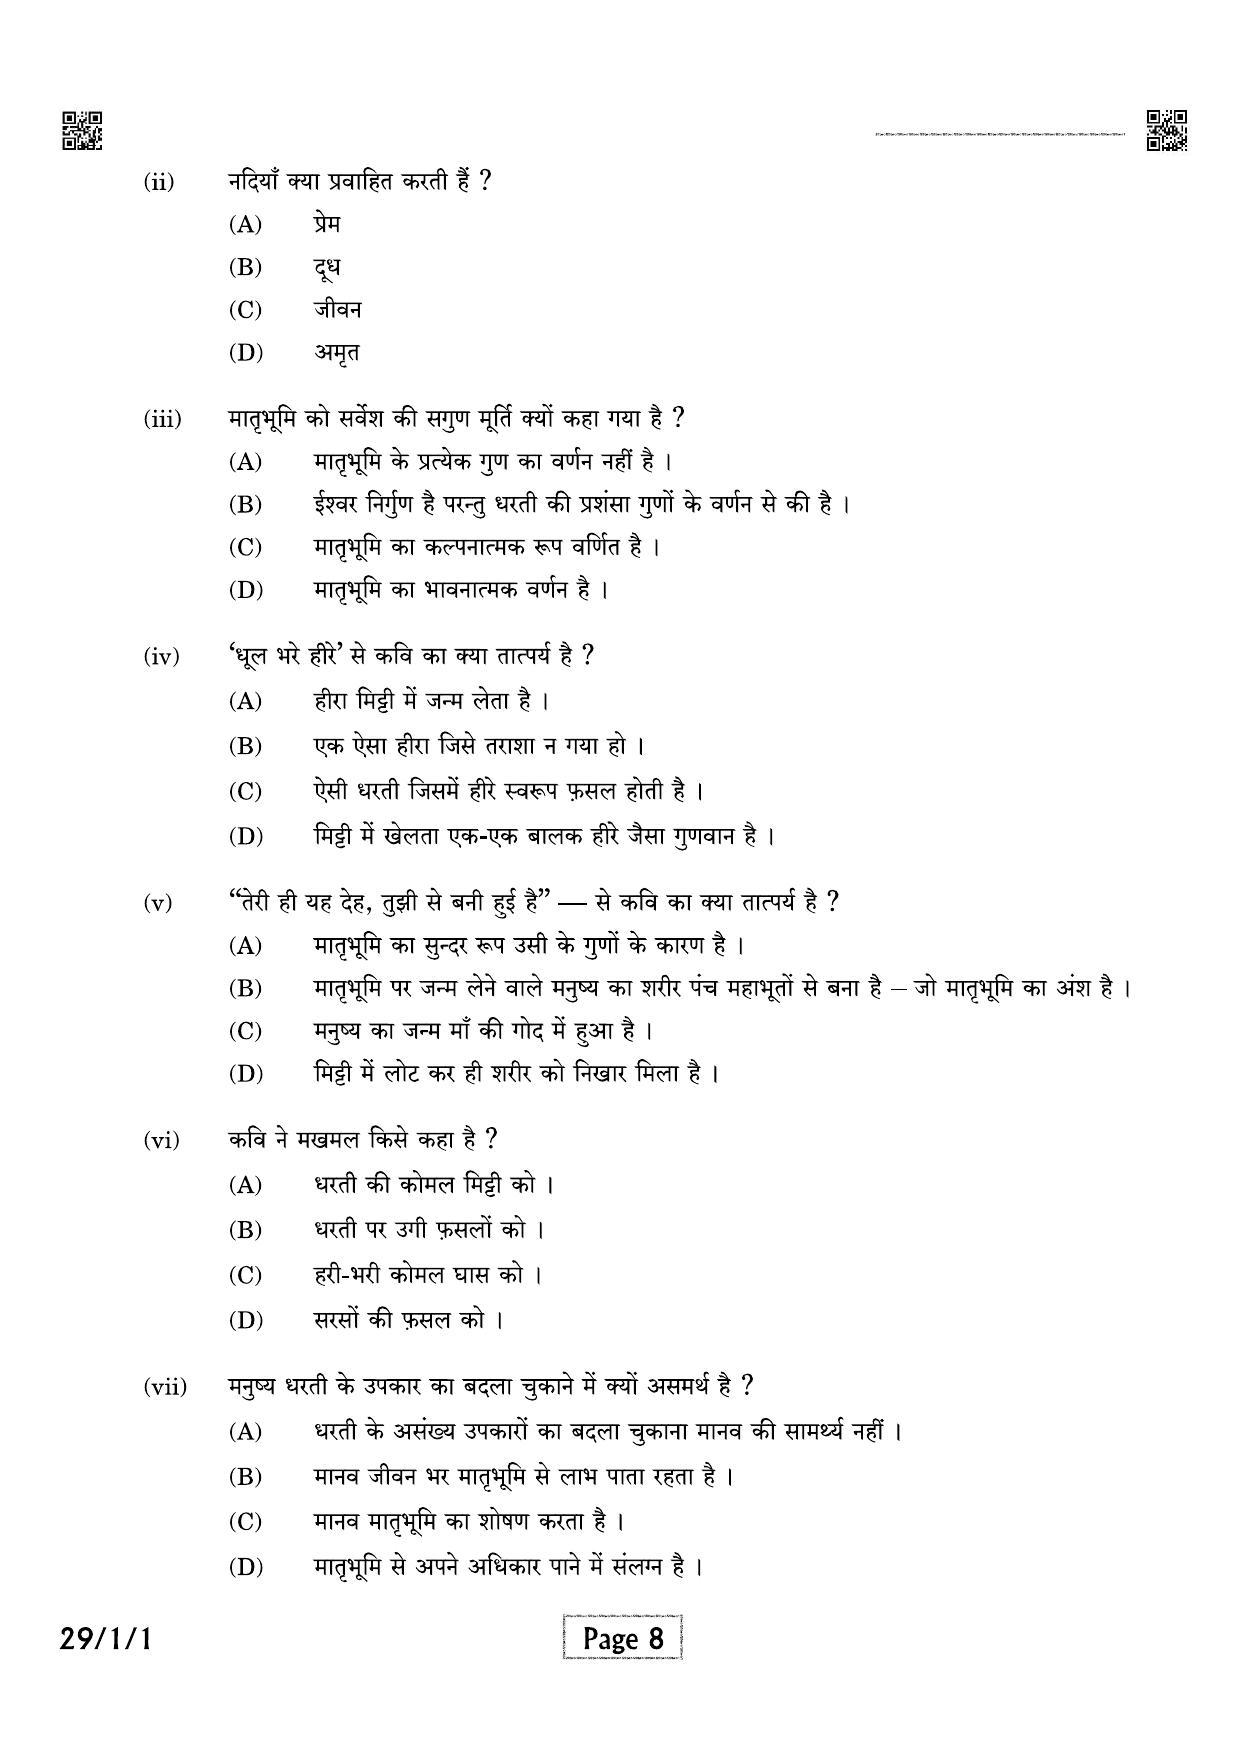 CBSE Class 12 QP_002_HINDI_ELECTIVE 2021 Compartment Question Paper - Page 8